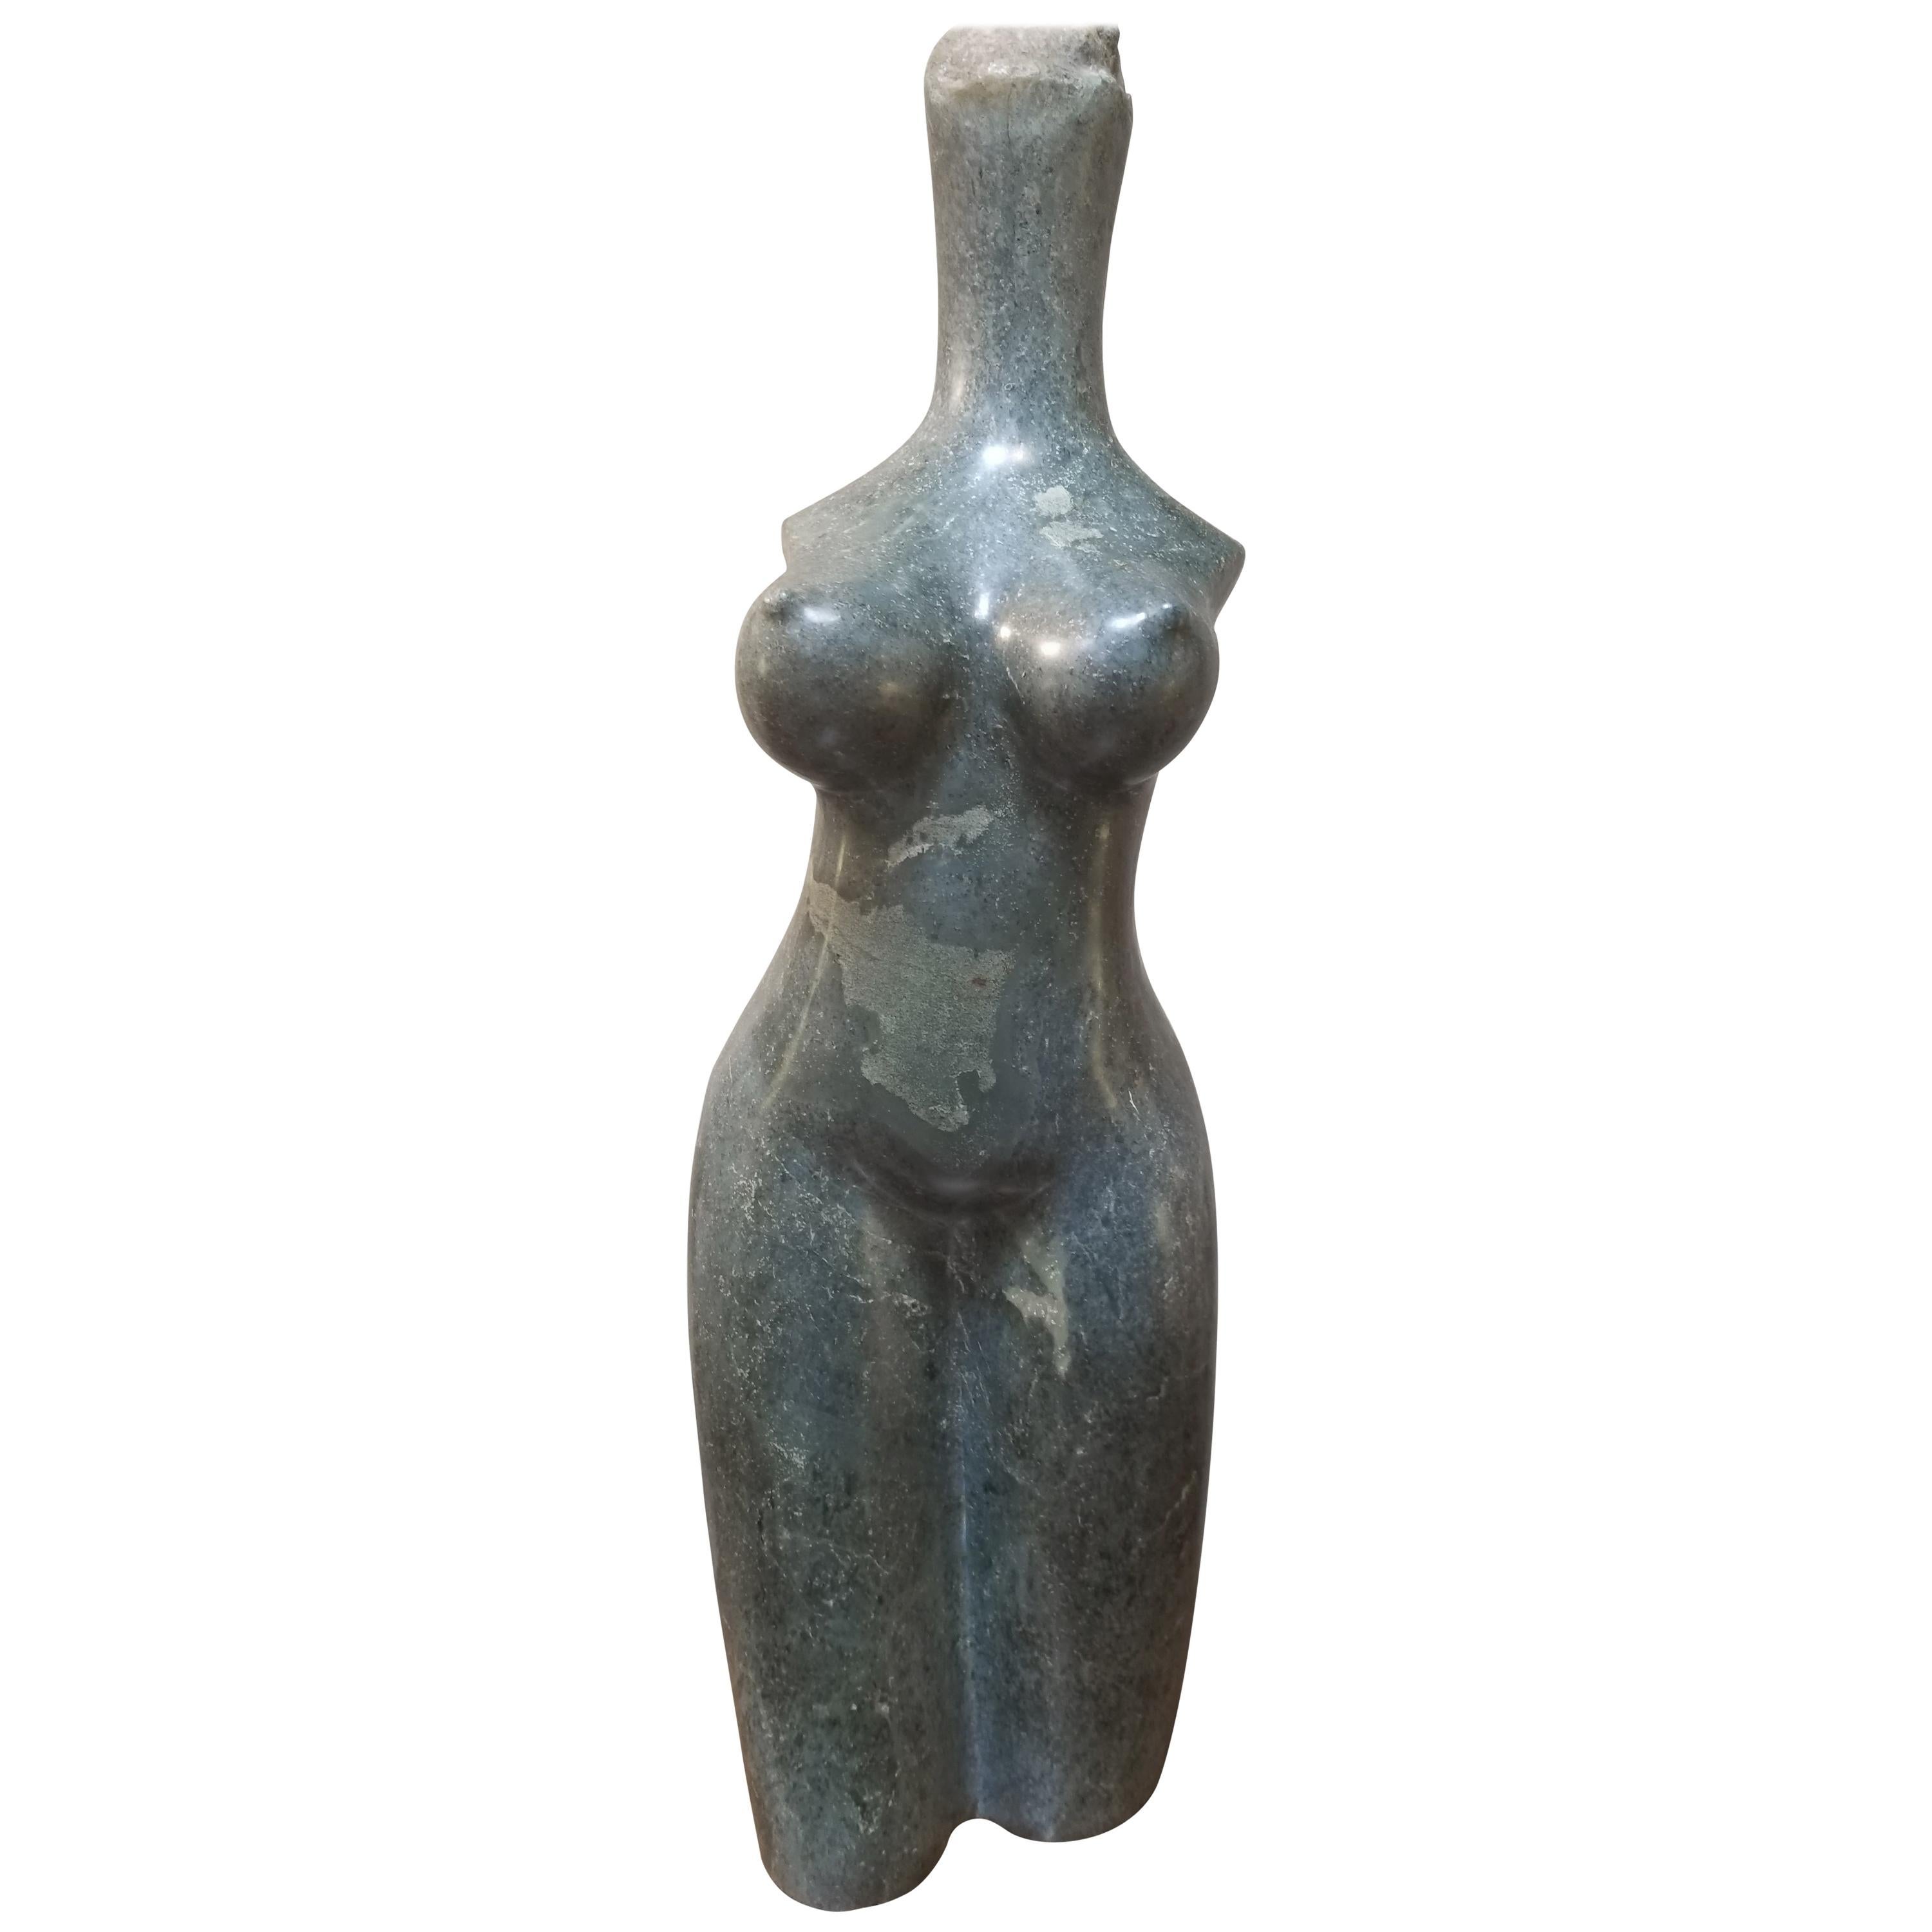 Woman's Torso Carved Stone Sculpture by Robert Chimika For Sale